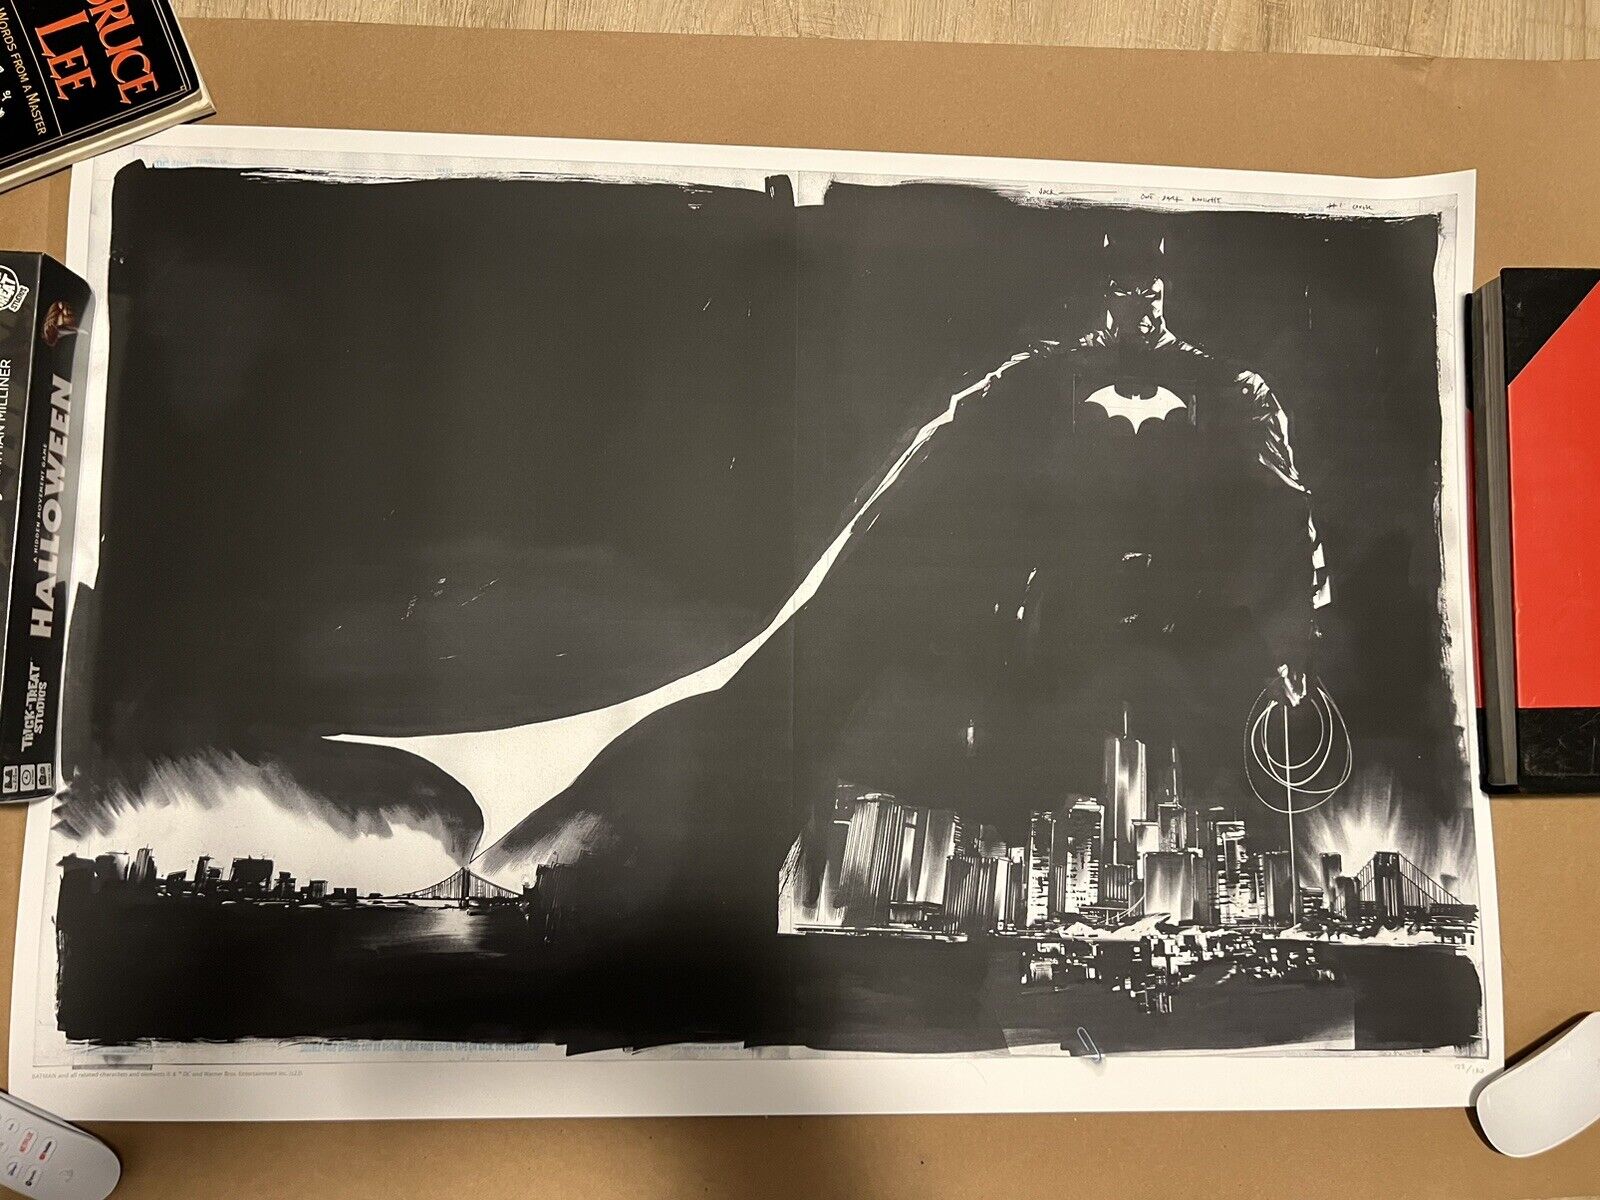 BATMAN ONE DARK KNIGHT Mondo Variant Poster JOCK sold out limited edition x/140